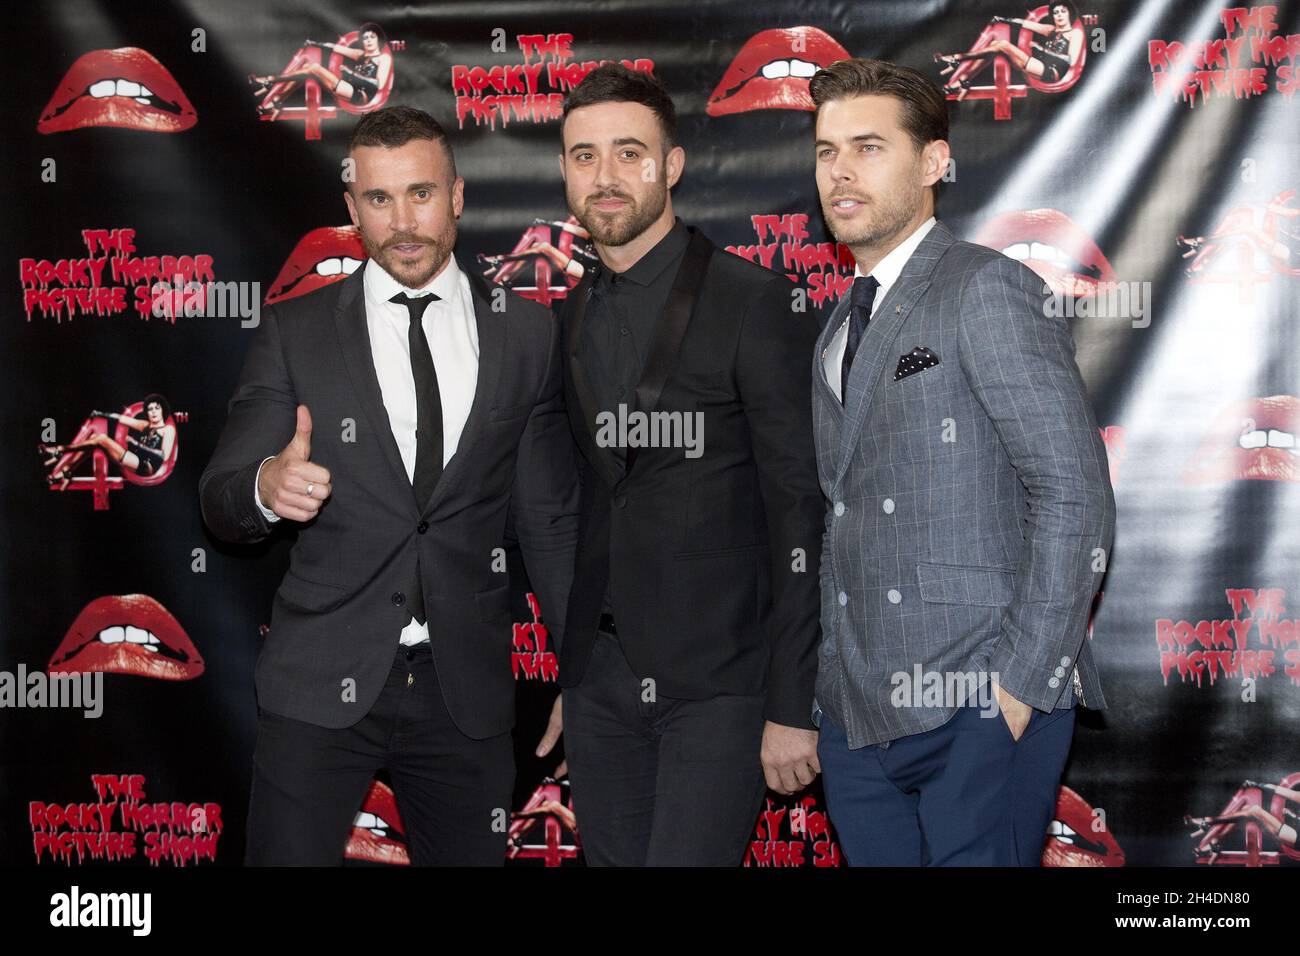 Members of The Overtones attend the The Rocky Horror Picture Show photocall at the Royal Albert Hall ahead of a Q&A at a special screening of the film in celebration of its 40th Anniversary.  Stock Photo